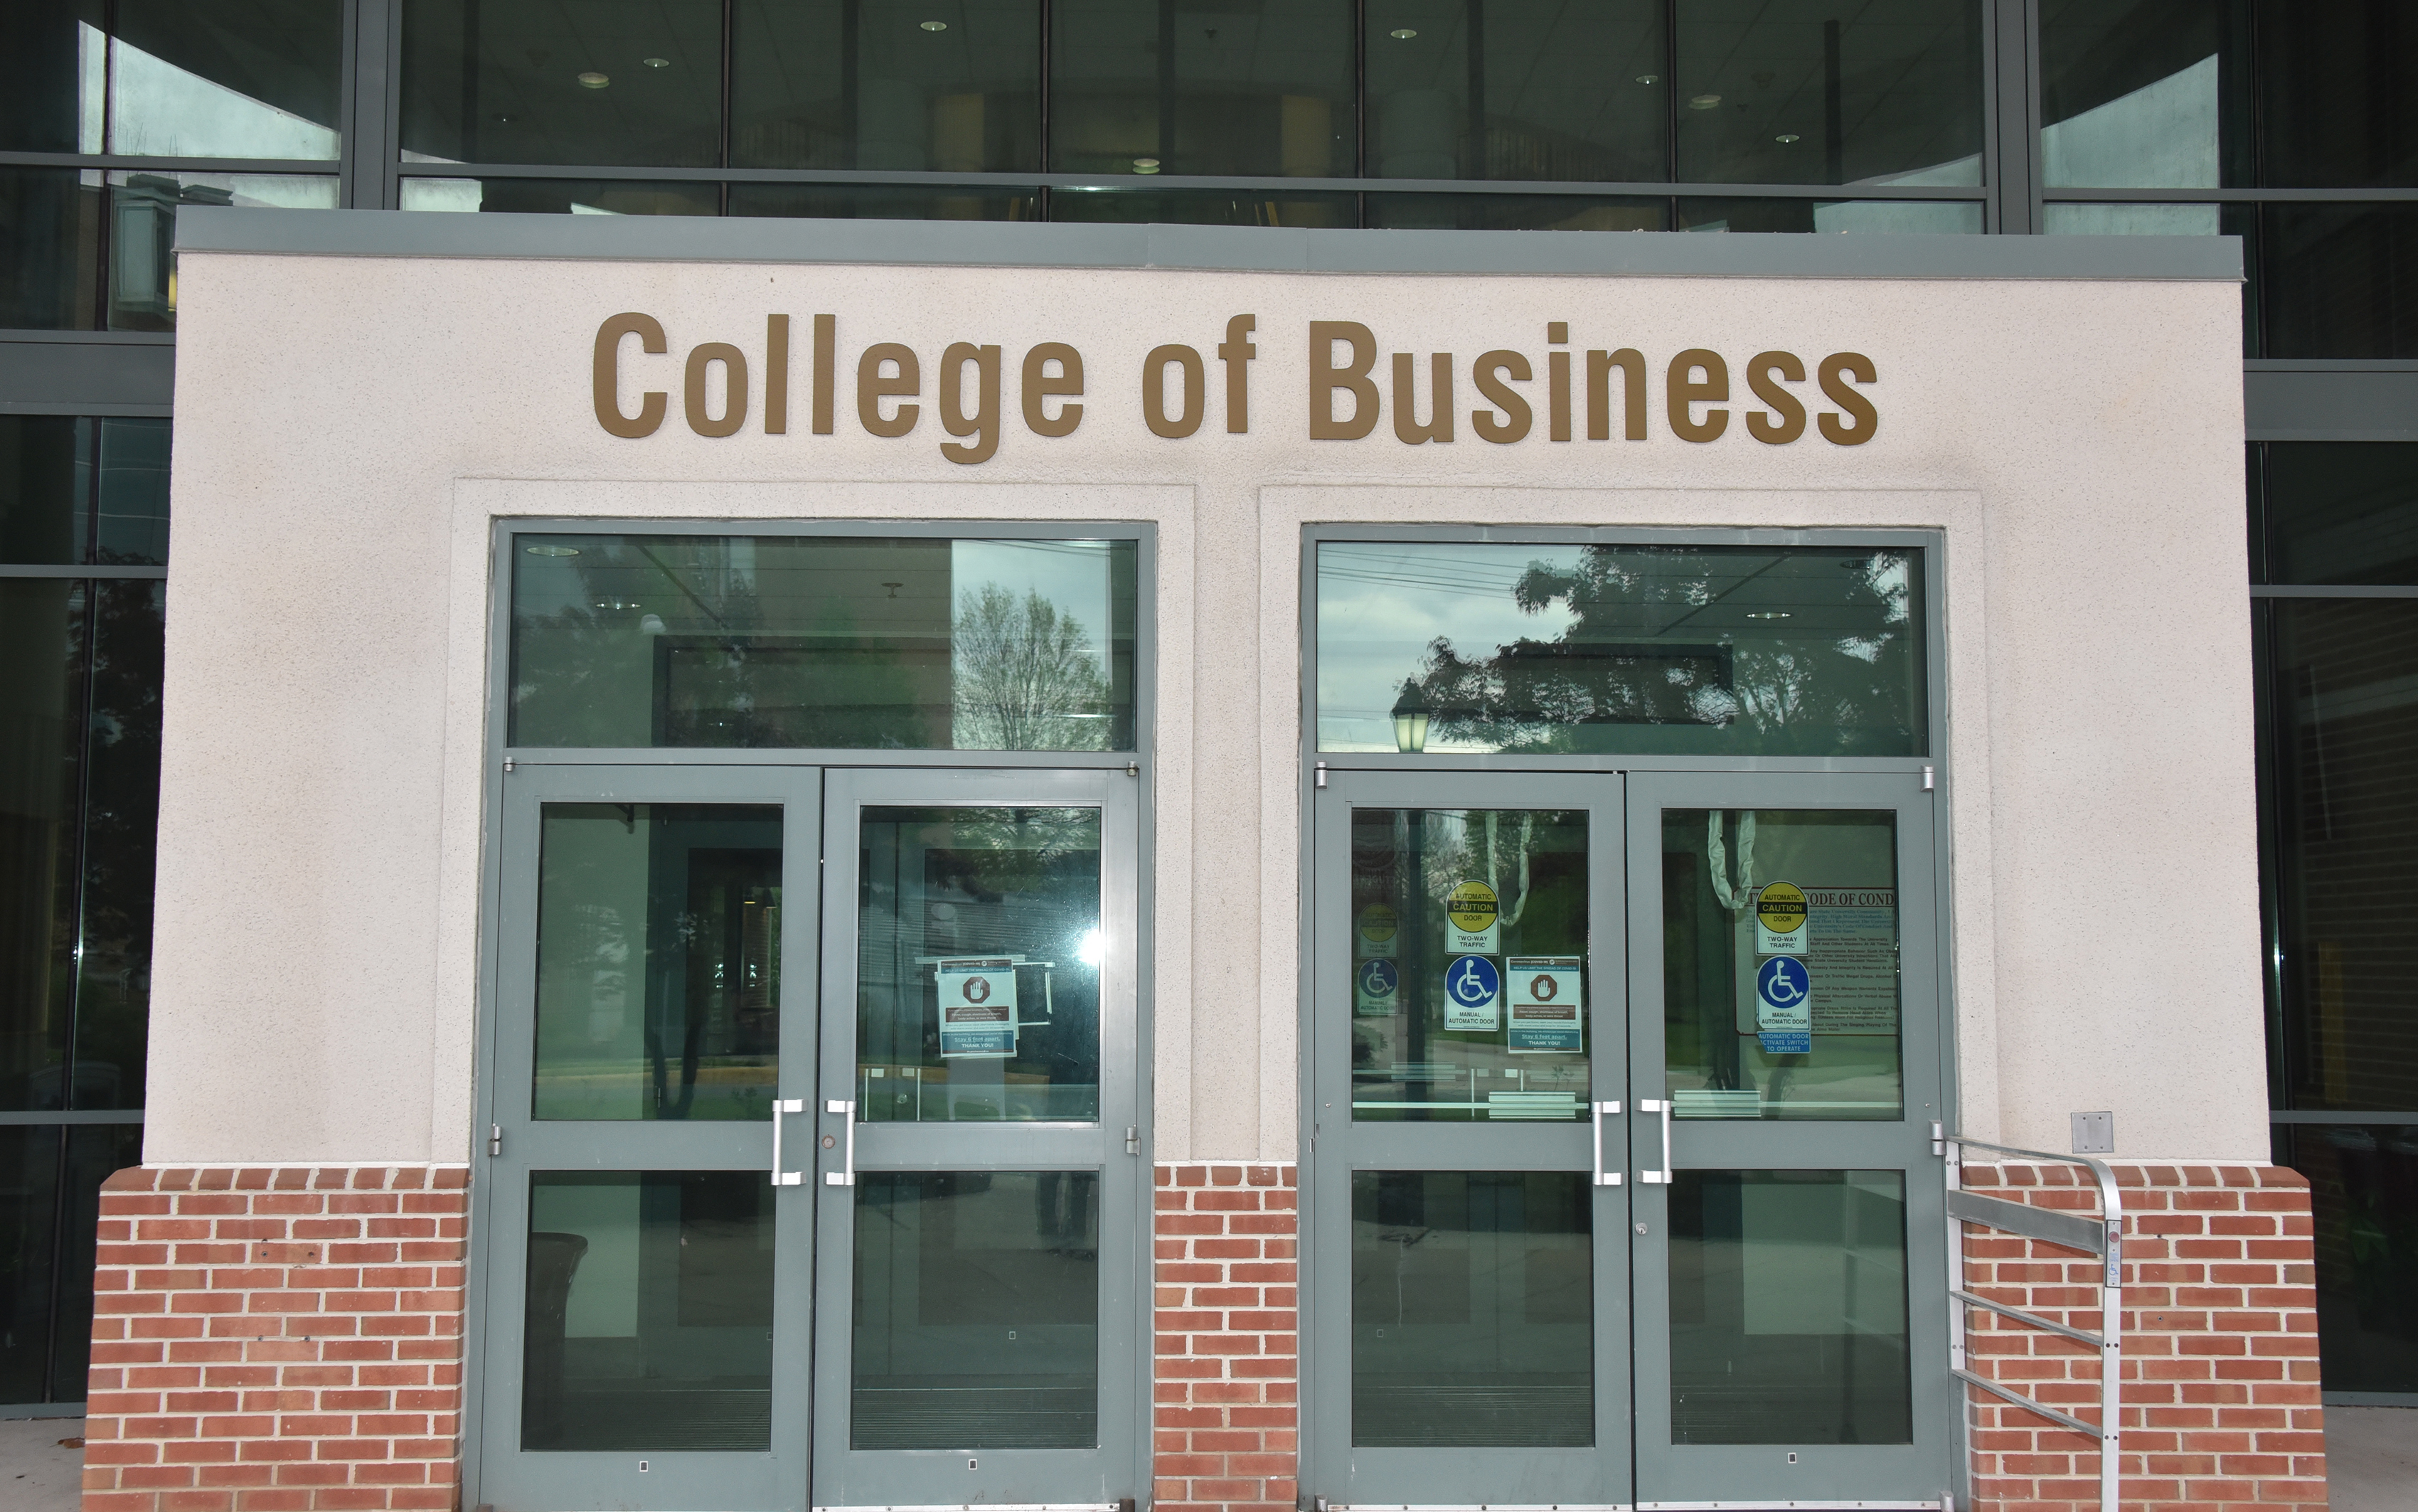 The College of Business' Delaware Center for Enterprise Development joined with the City of Dover and the Central Delaware NAACP to sponsor a Small Business Virtual Town Hall on June 3